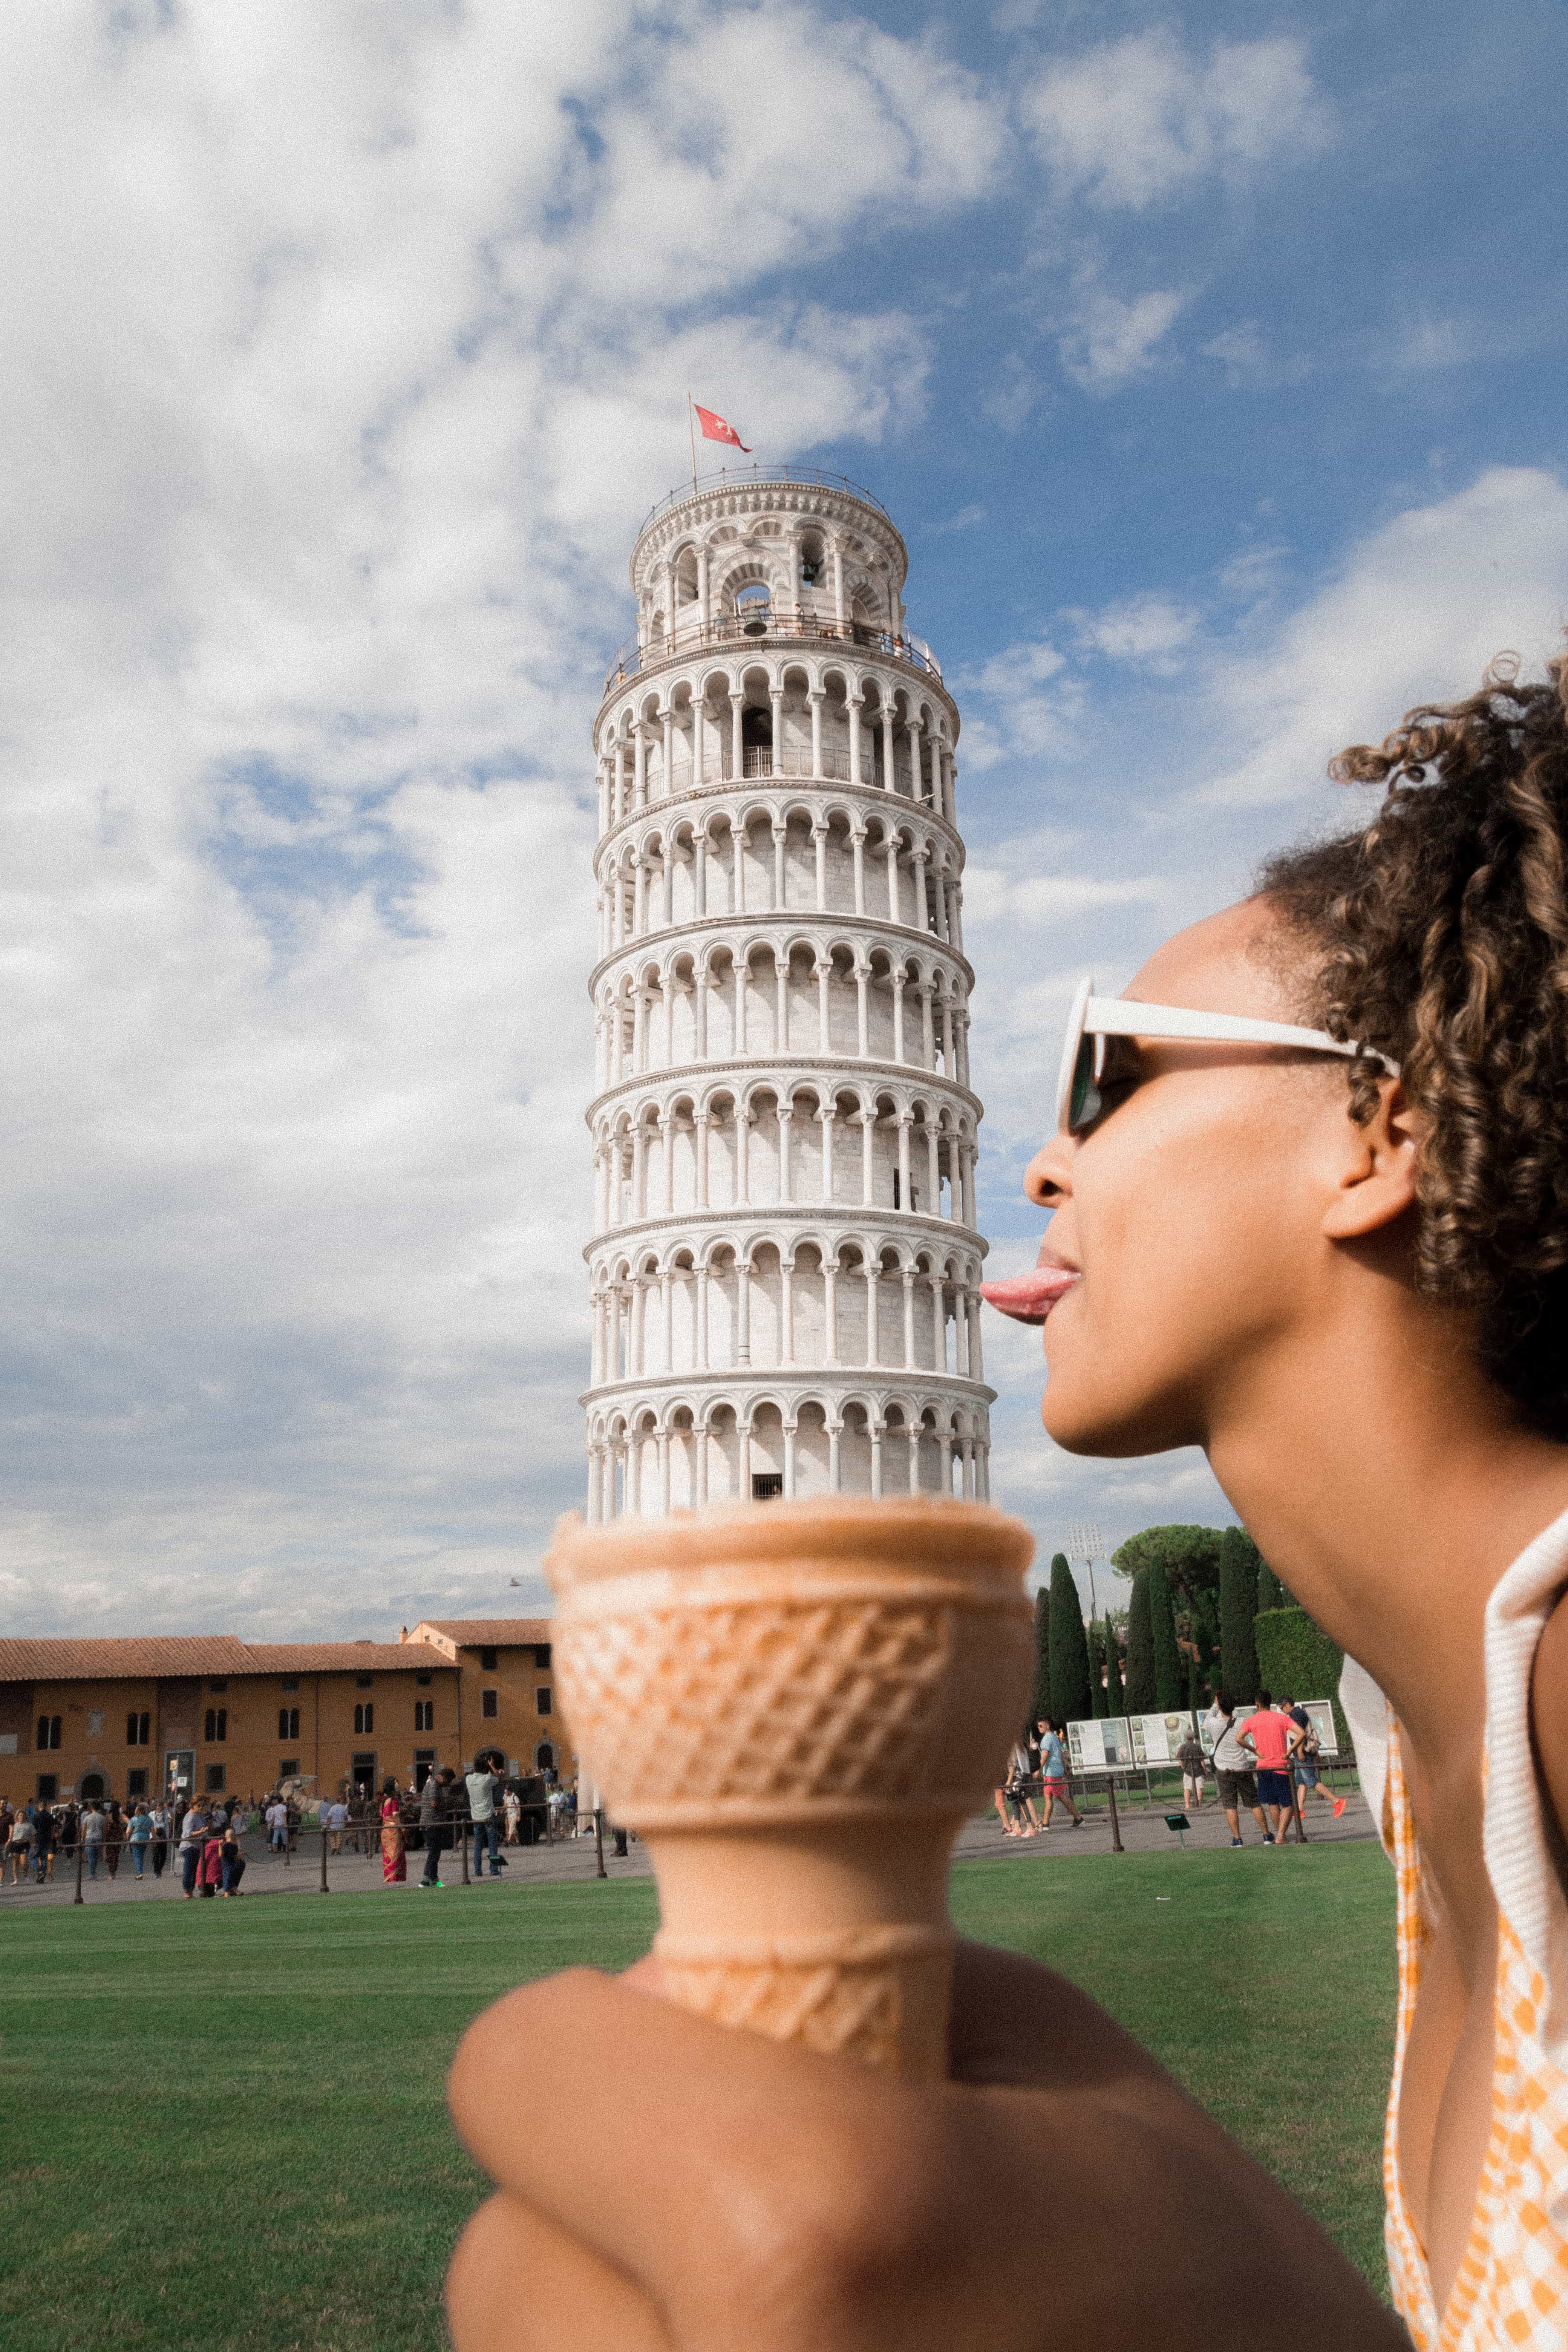 Real Estate Marketing Video Best Practices - A photo on the Leaning Tower of Pisa